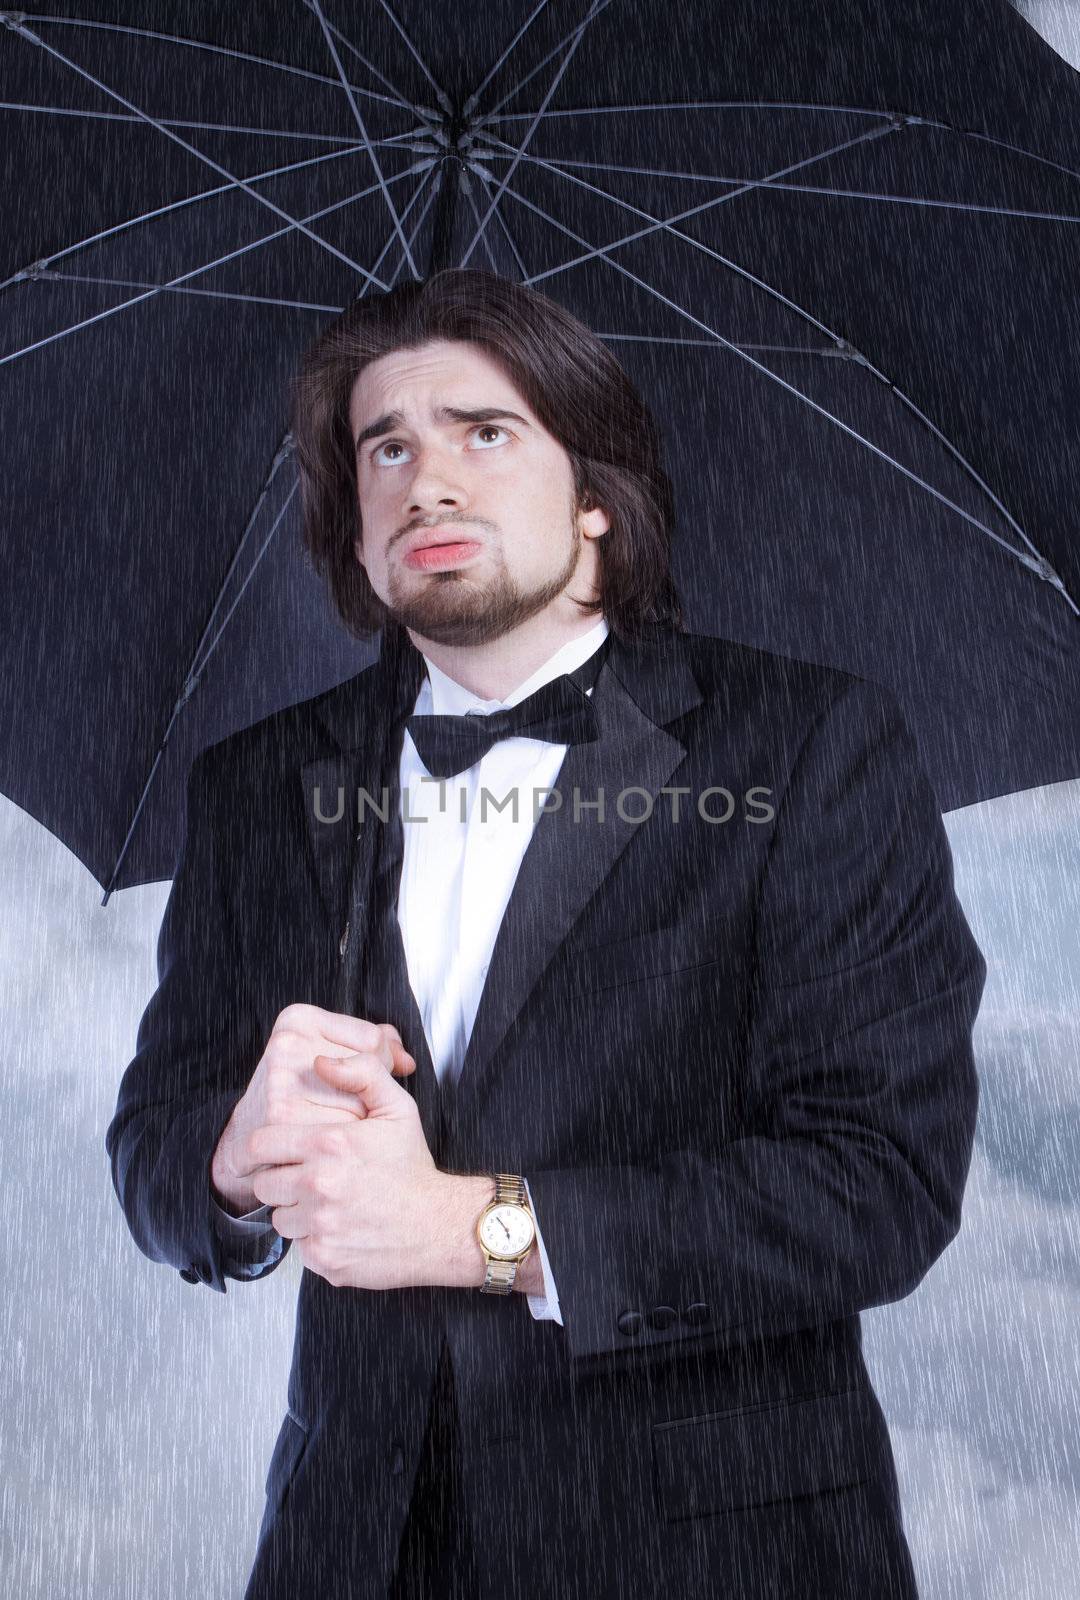 Man Holding Umbrella in the Rain and Sighing by melpomene